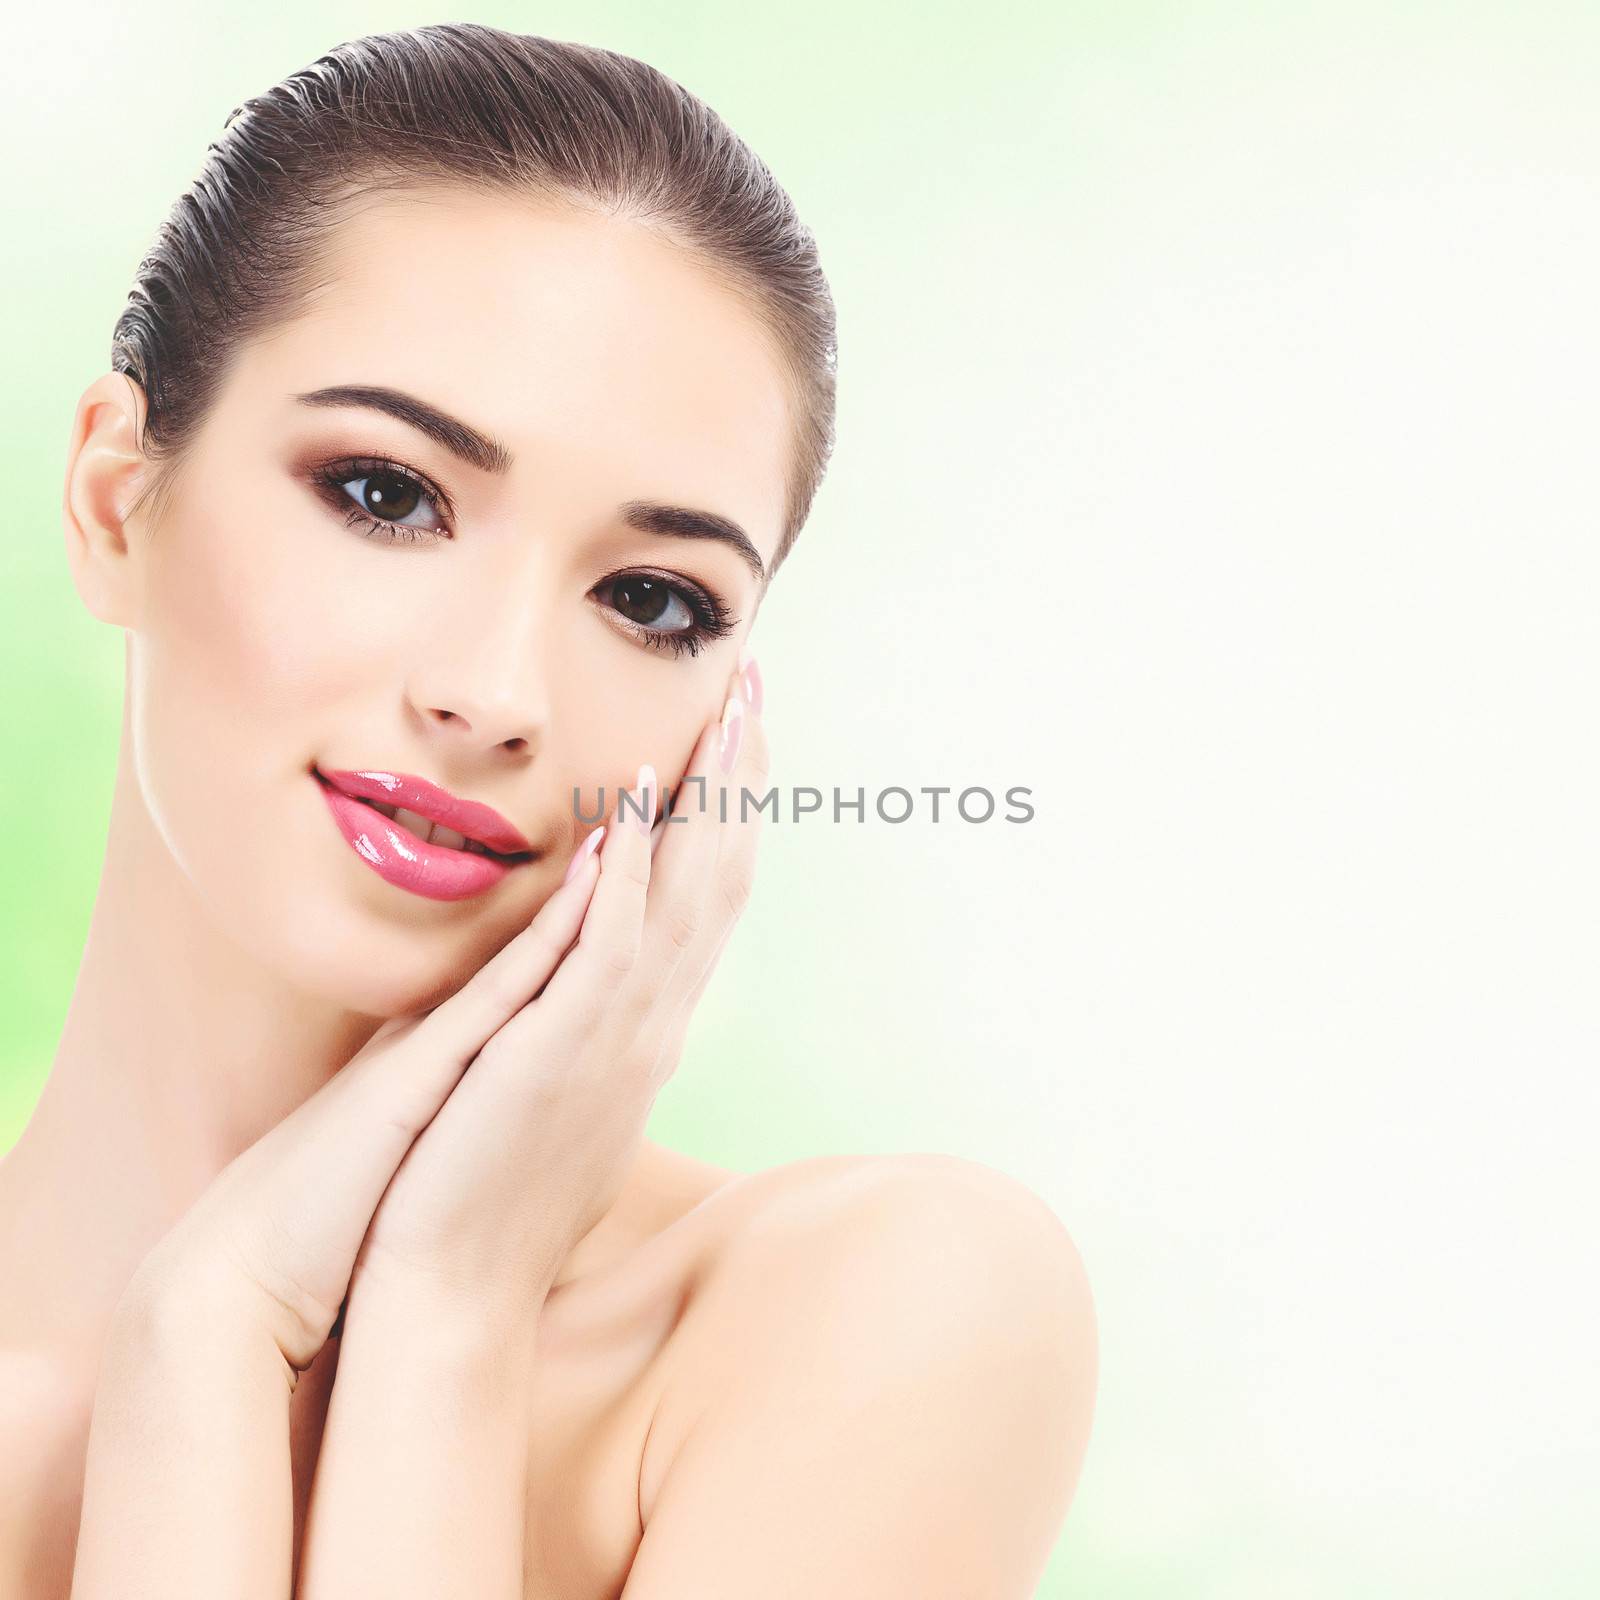 Beautiful girl with clean fresh skin, abstract green blurred background with copyspace